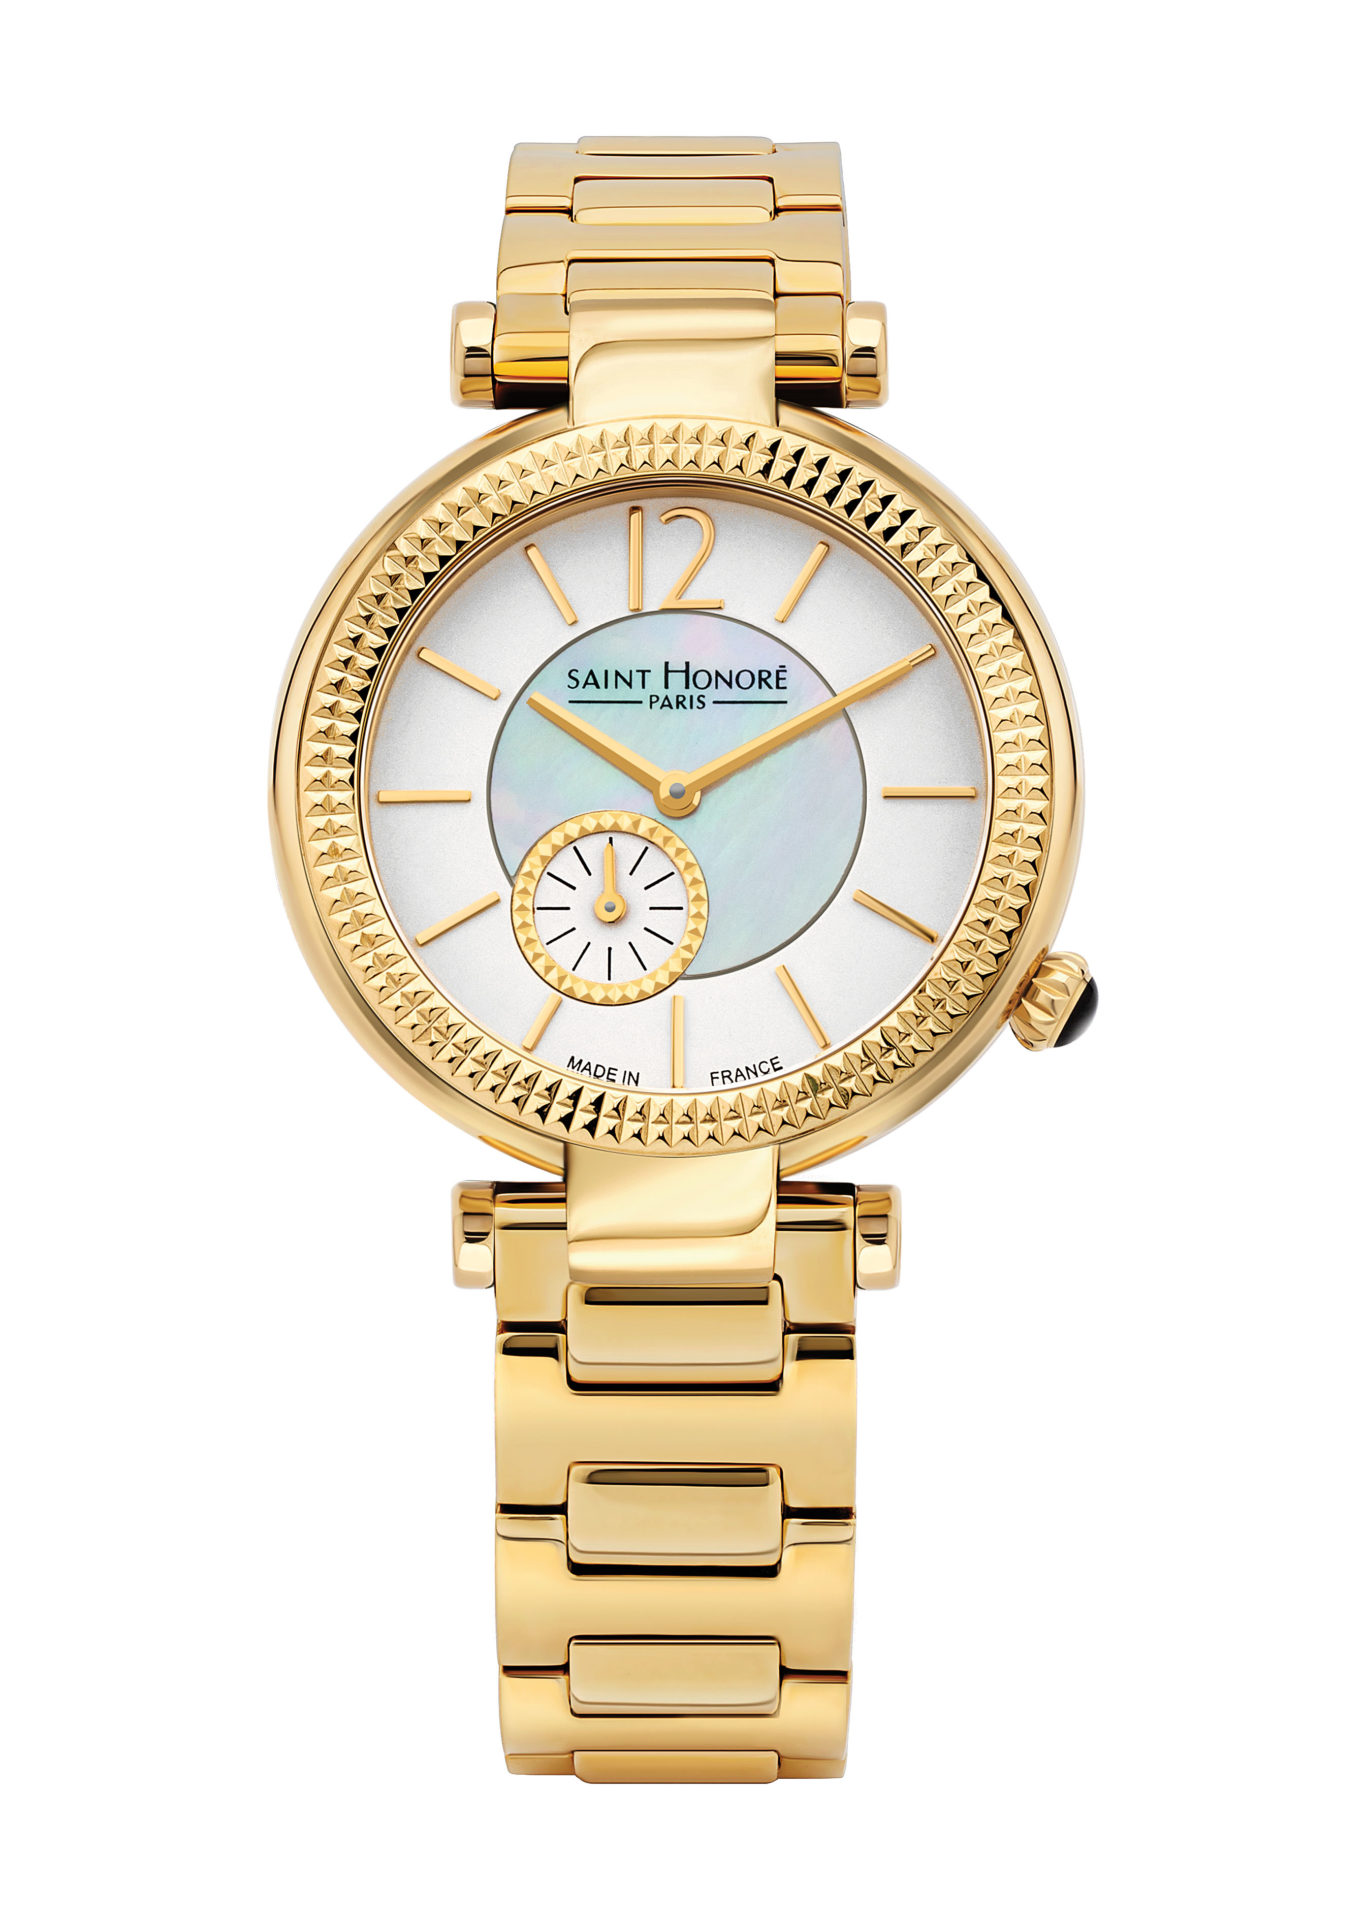 AUDACY Women's watch - ion plating gold case, white dial, IPG metal strap